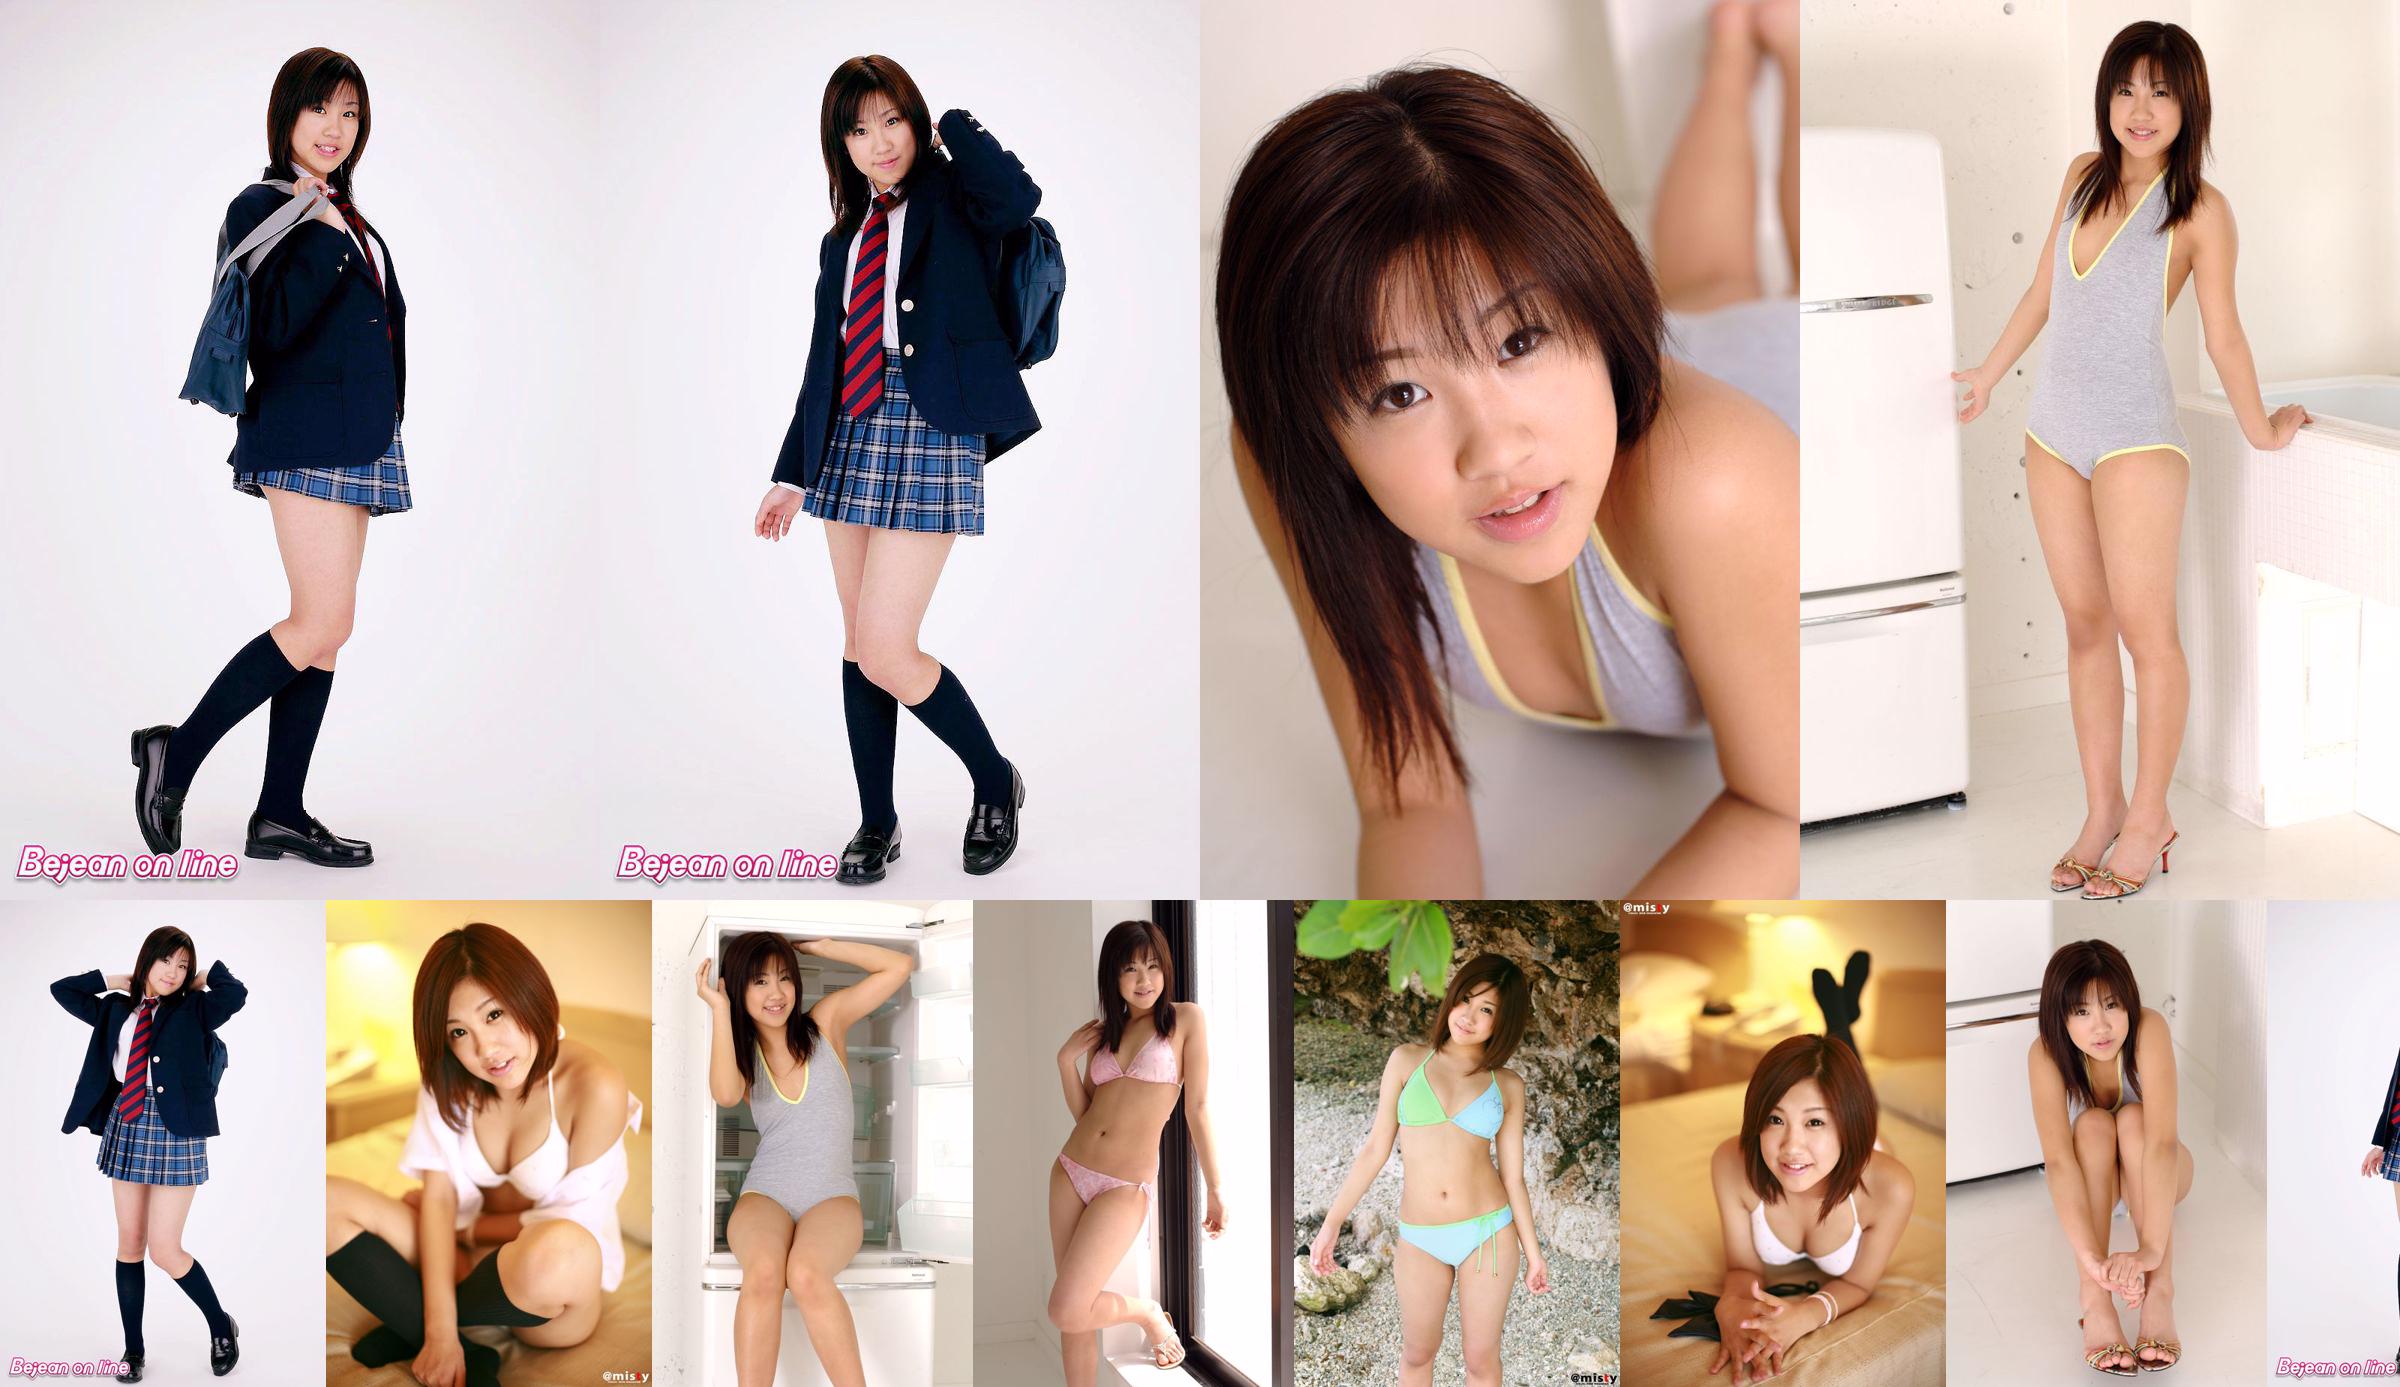 Private Bejean Girls’ School Maho Nagase 永瀬麻帆 [Bejean On Line] No.0cefd9 Page 1